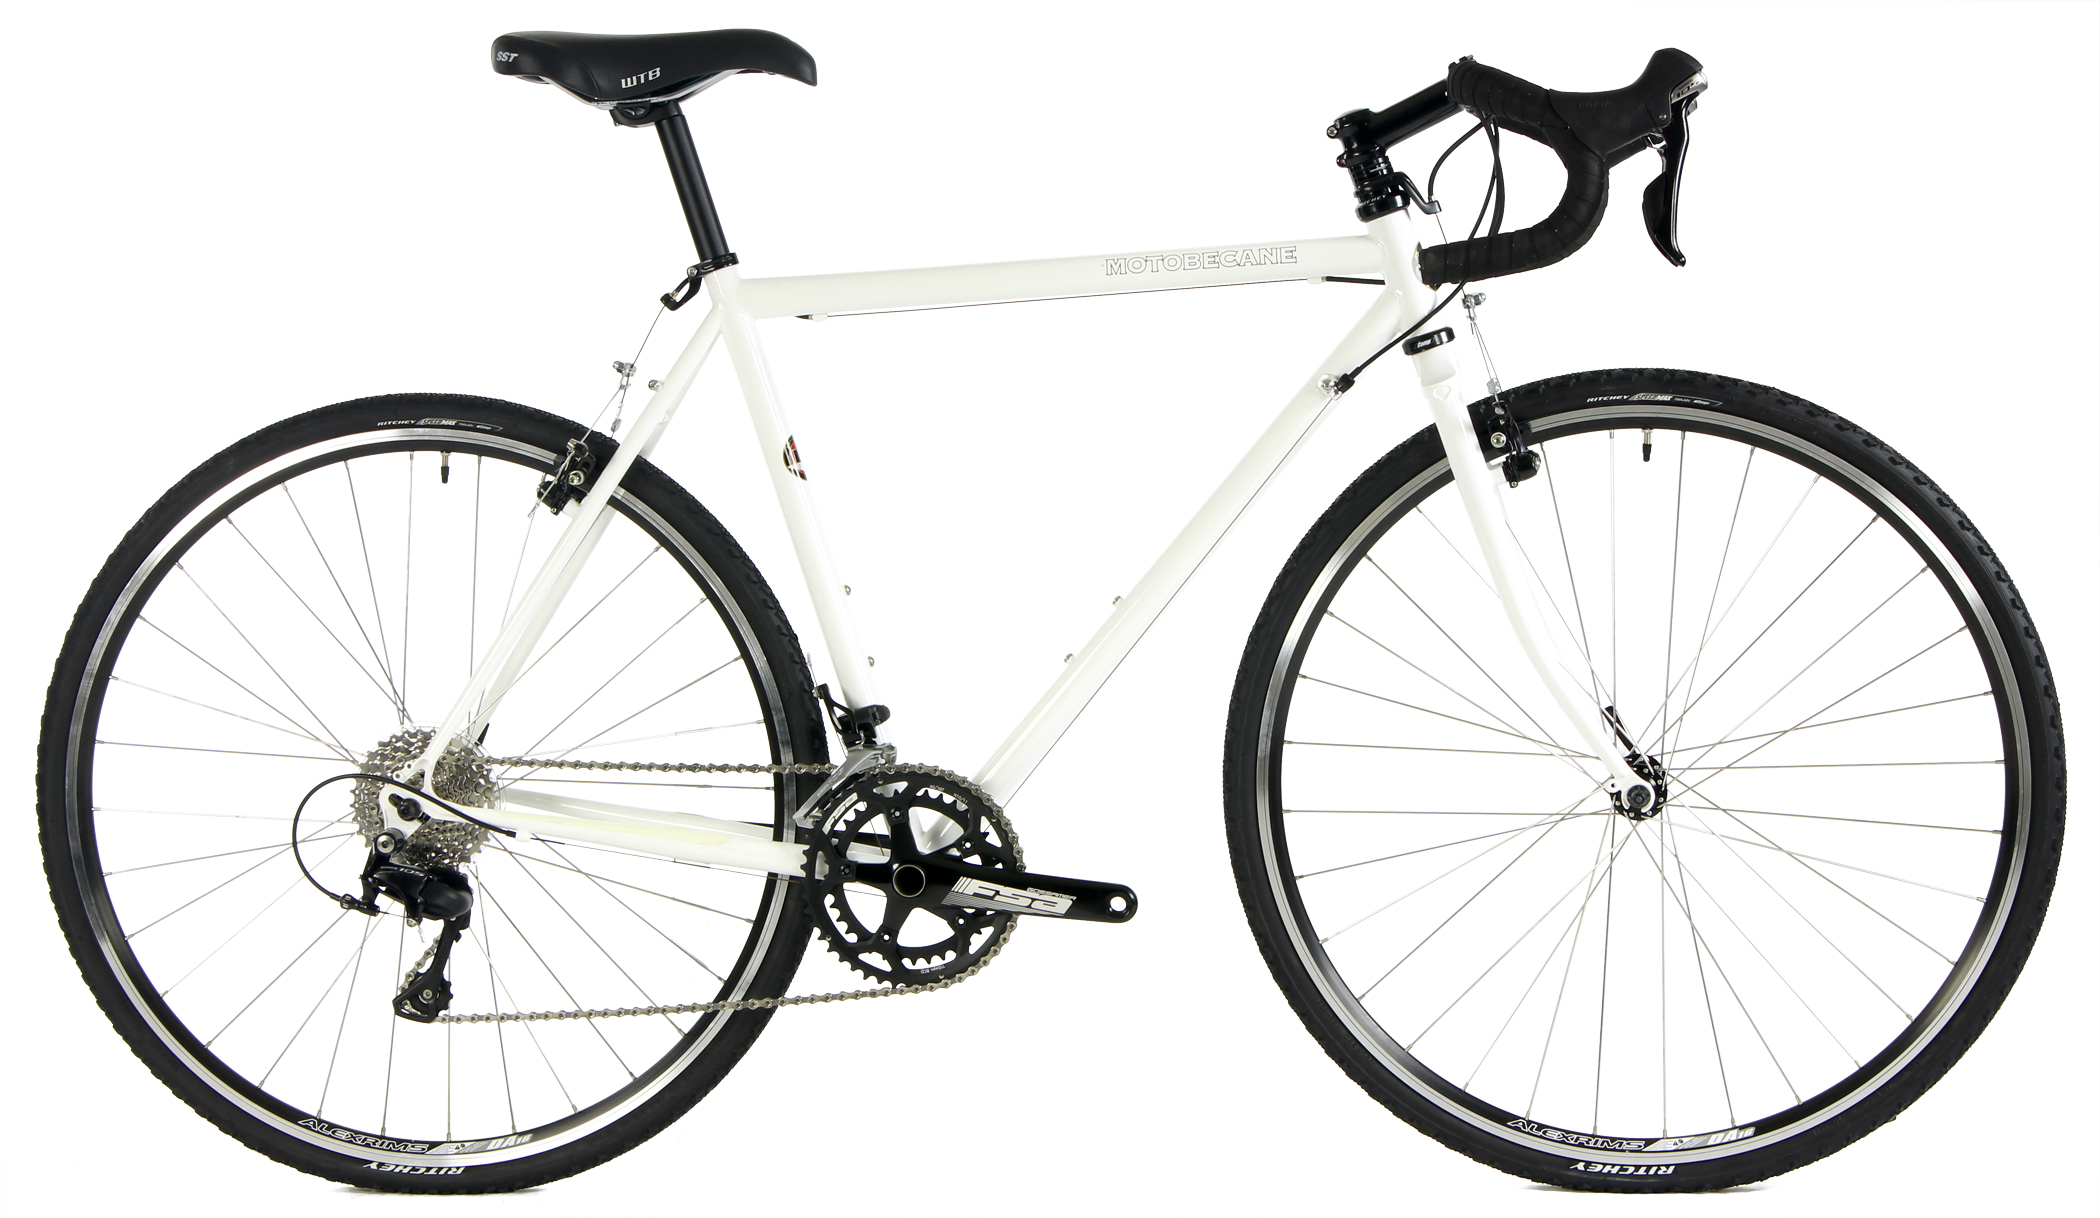 Free Shipping* Save up to 60% off new Cyclocross Road Bikes